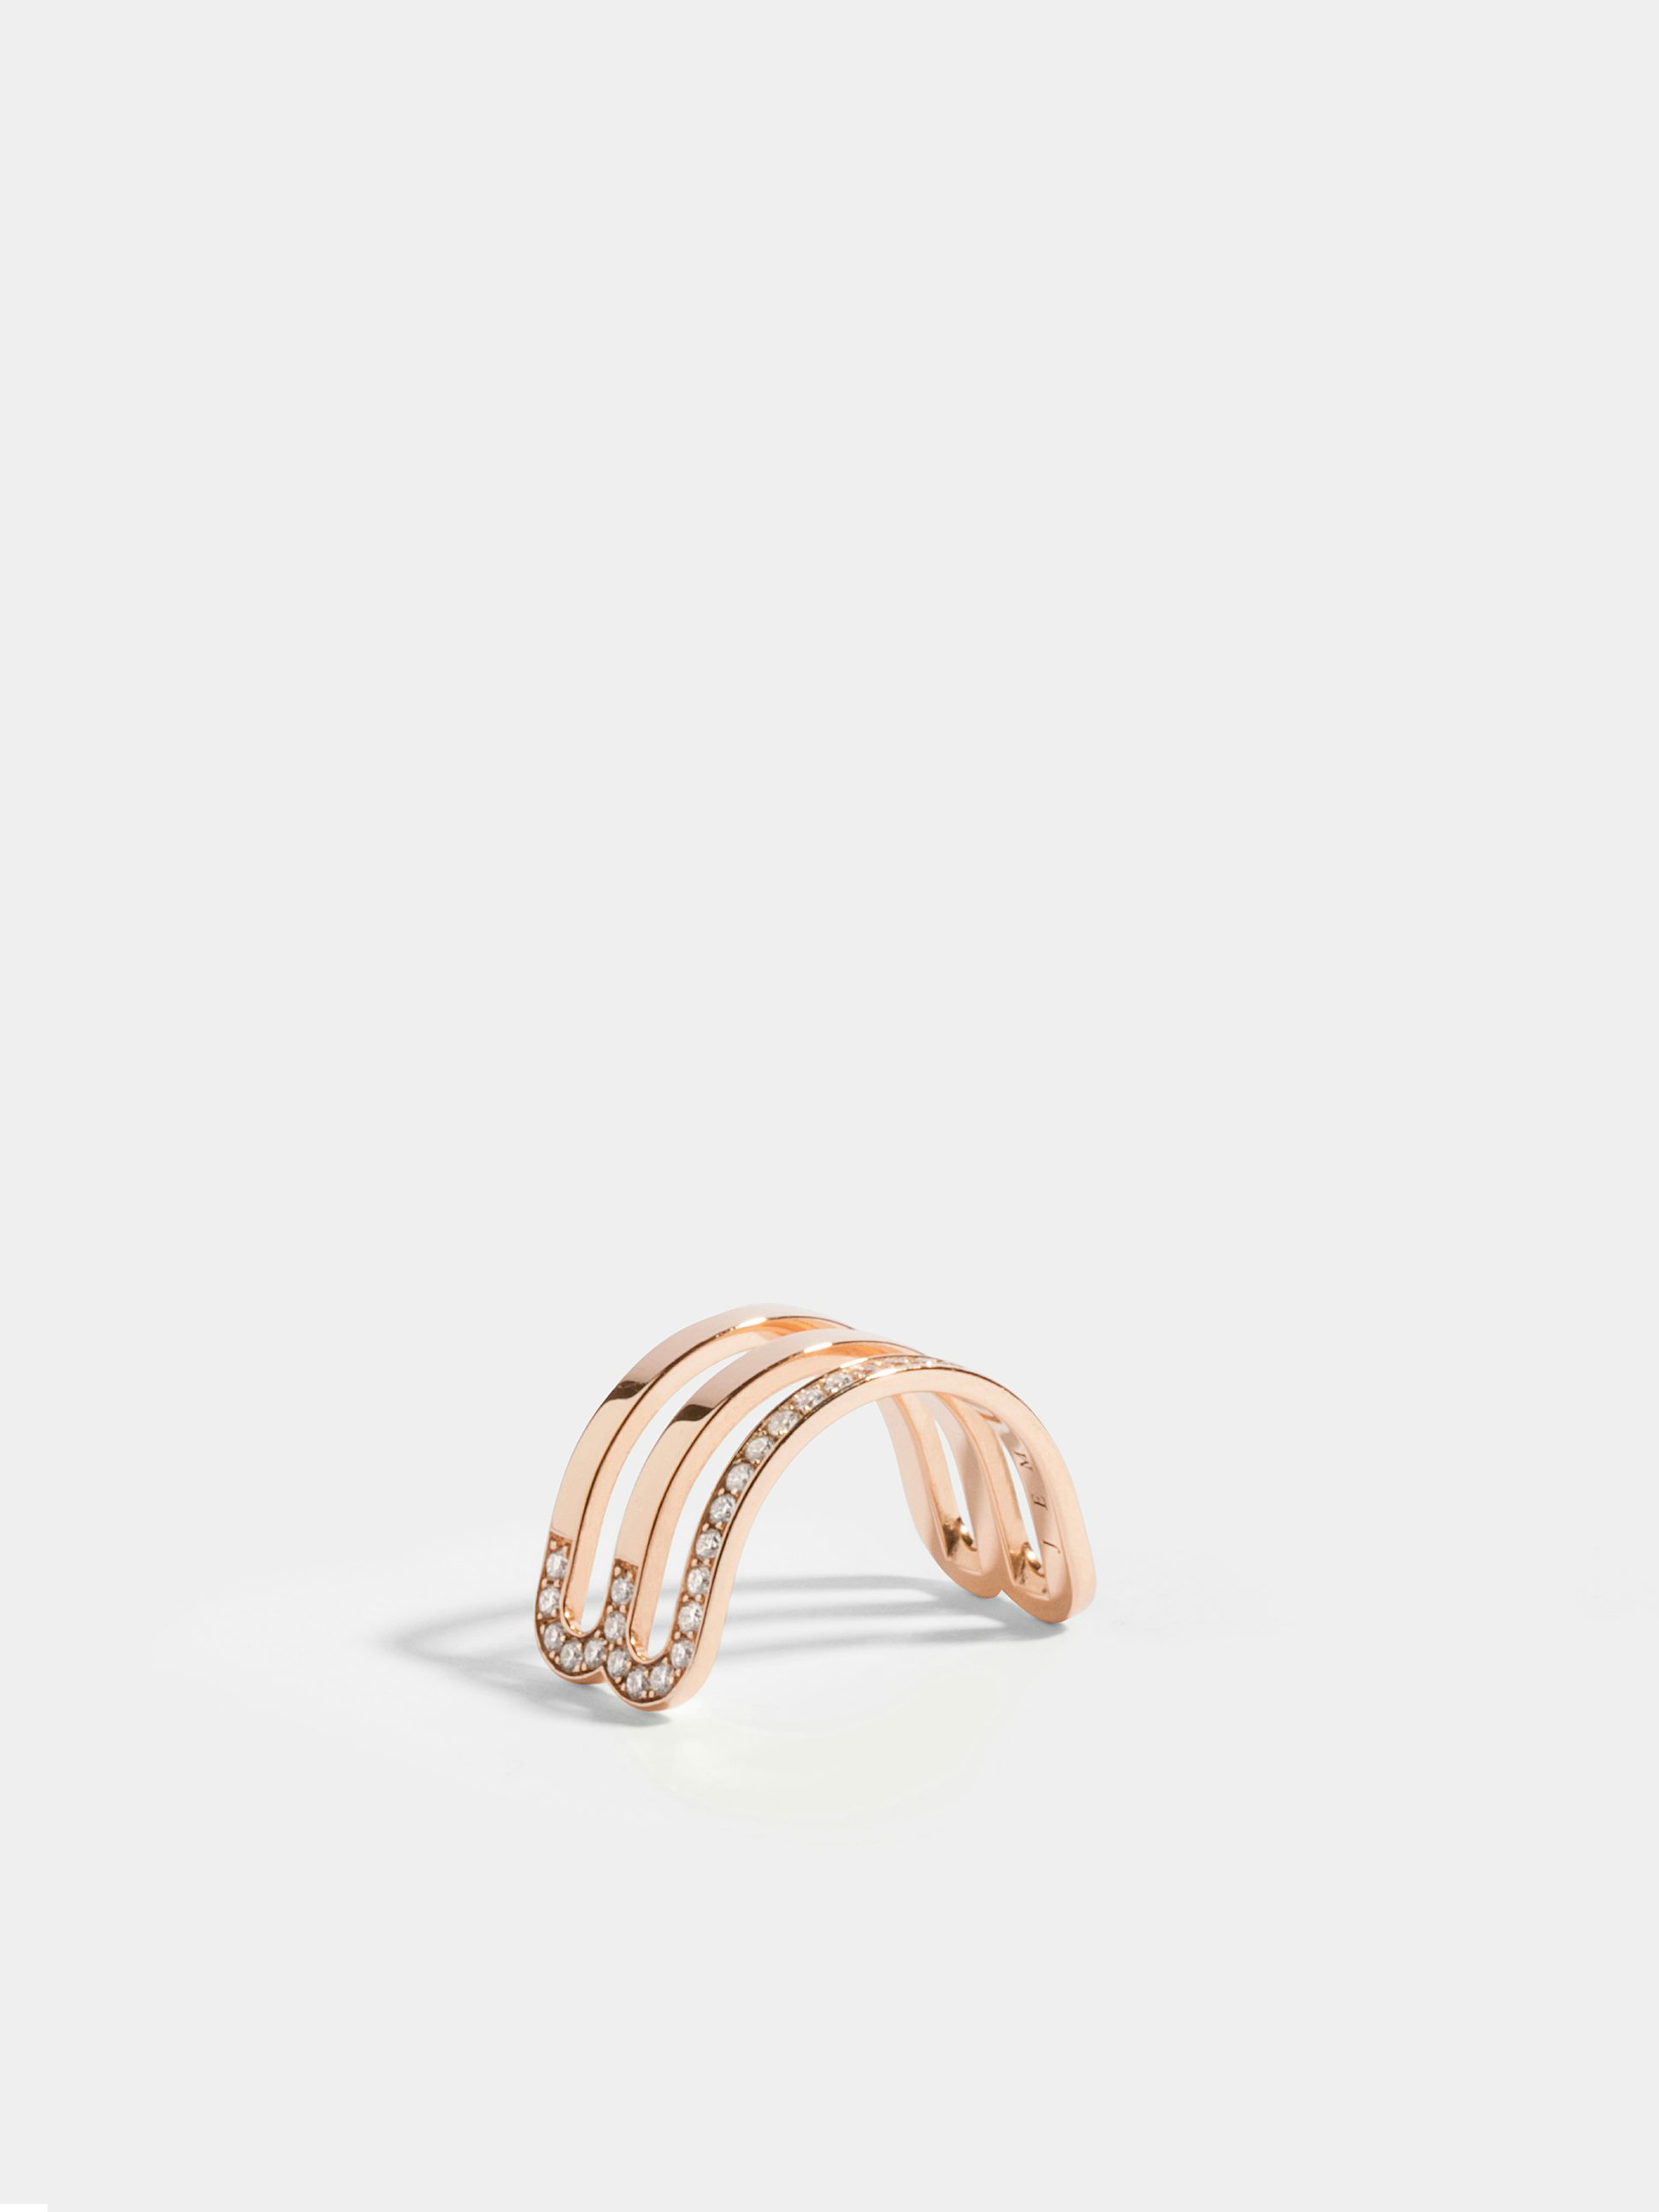 Étreintes double half-ring in 18k Fairmined ethical rose gold, paved with lab-grown diamonds on one line.